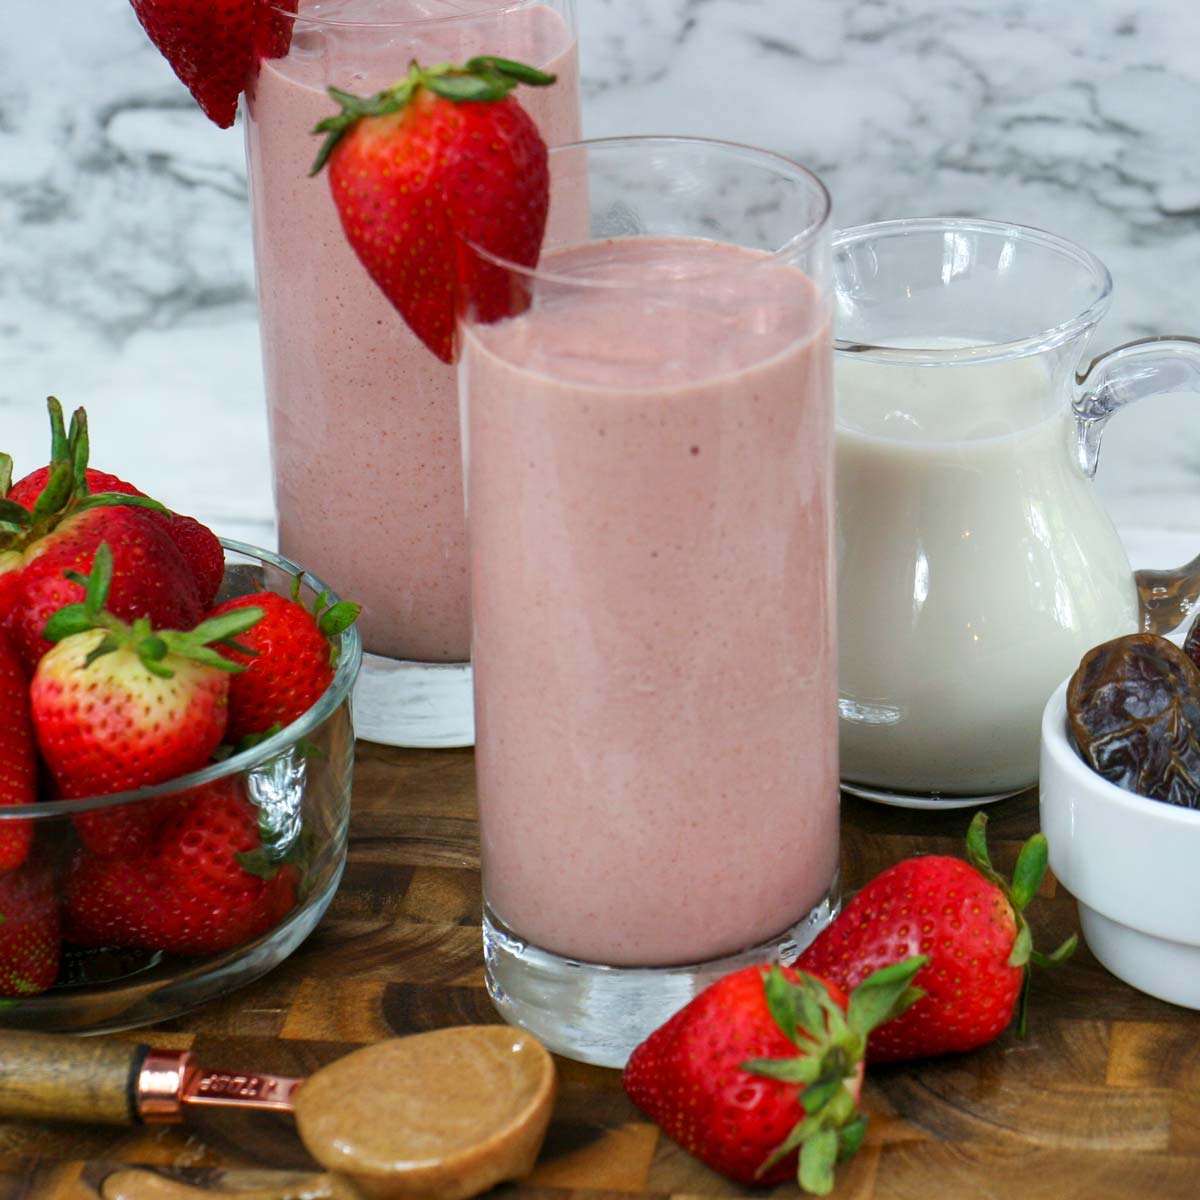 Healthy Frozen Strawberry Smoothie (without yogurt or banana)